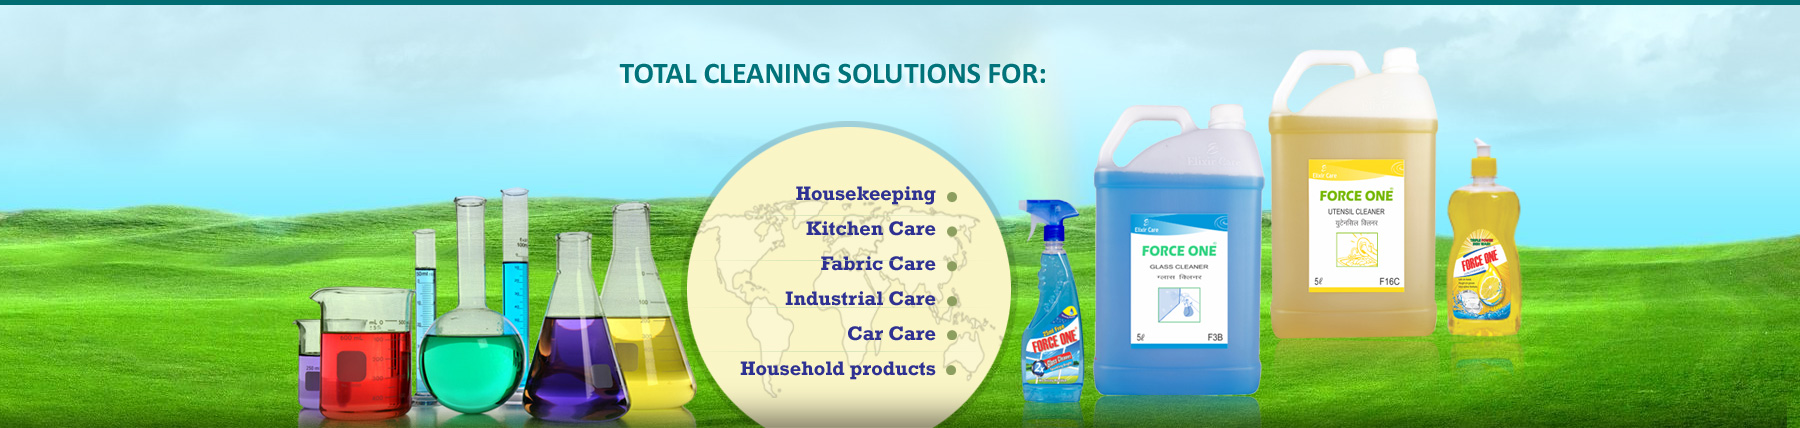 Cleaning Chemical Manufacturers